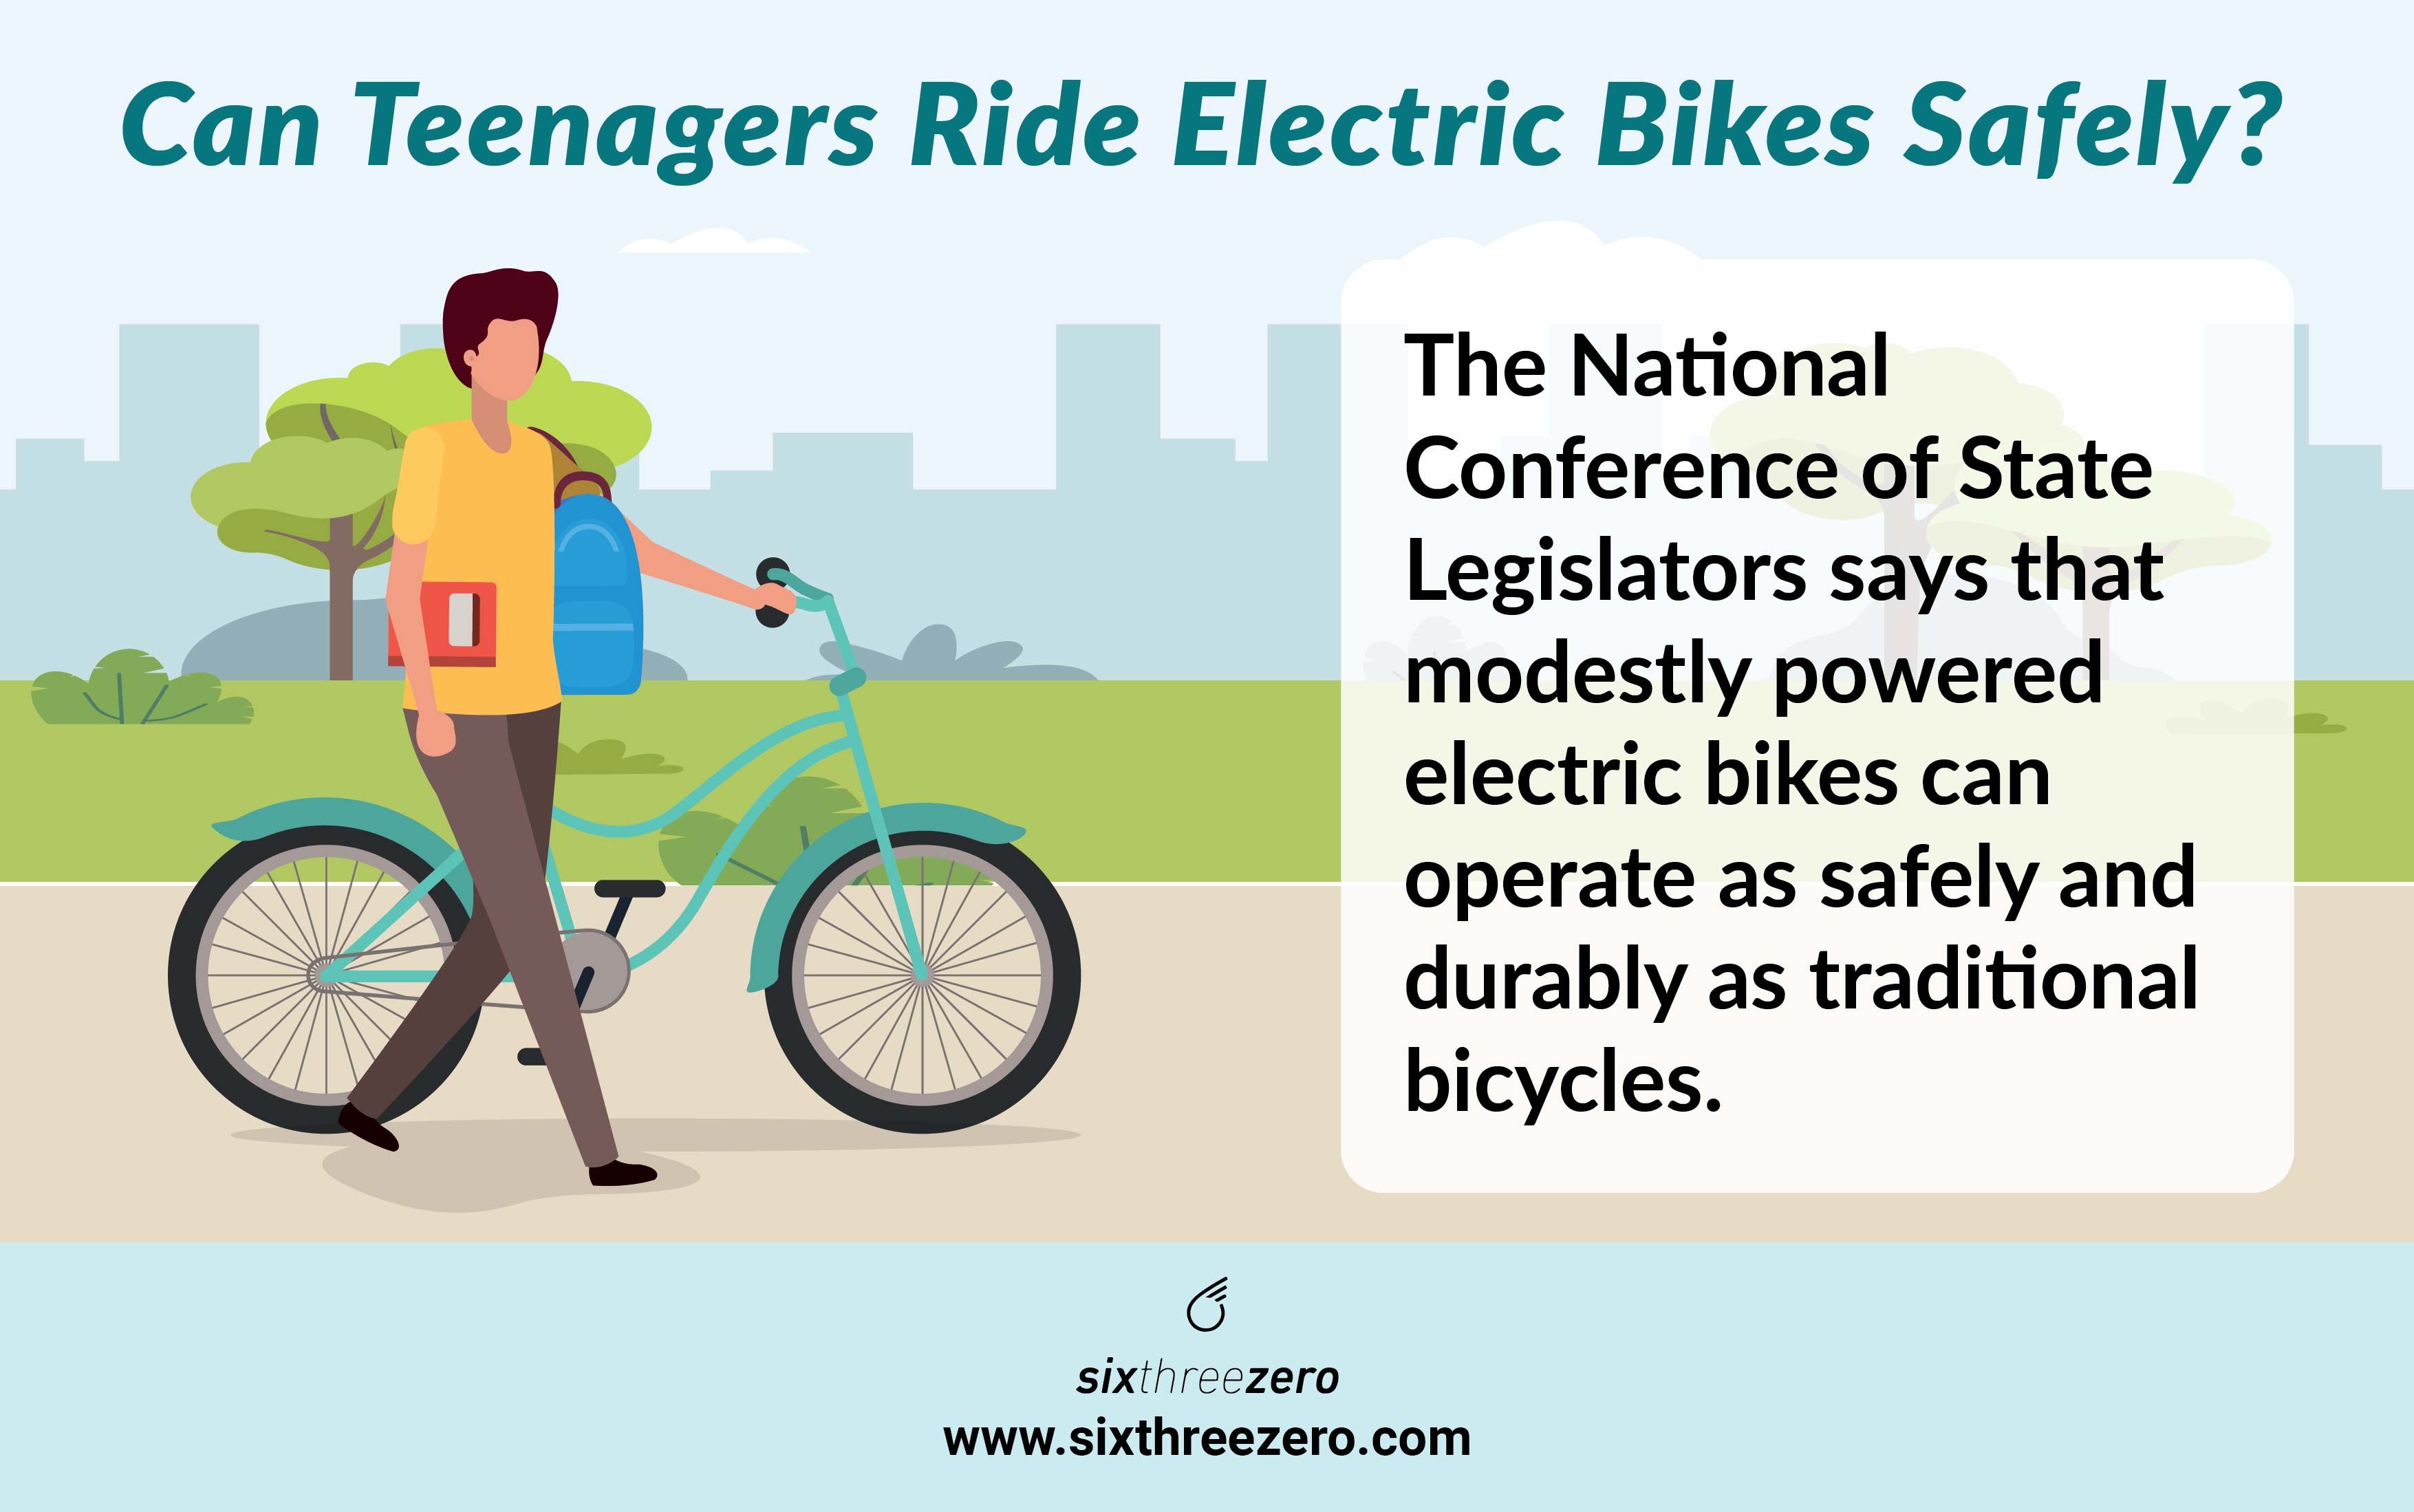 What Are the 5 Safest Electric Bicycles for Teenagers?